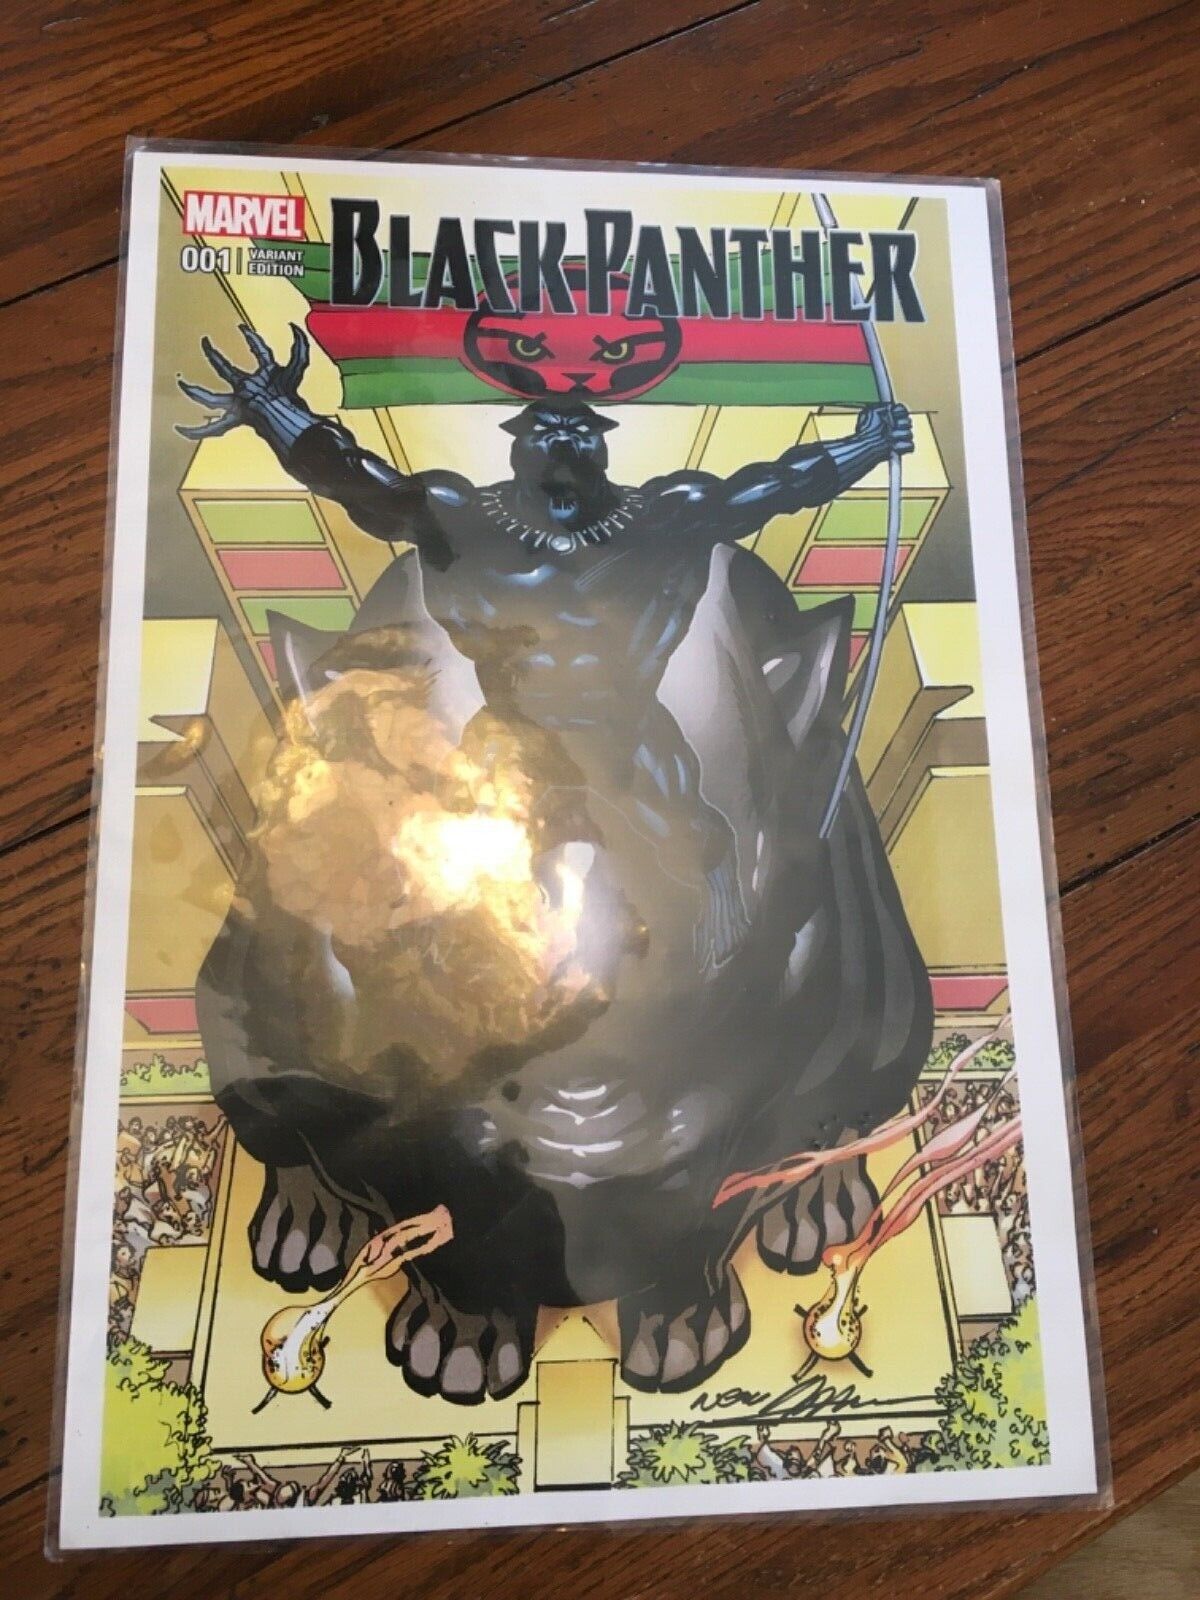 NEAL ADAMS signed BLACK PANTHER #1 MARVEL VARIANT EDITION PRINT 19x13